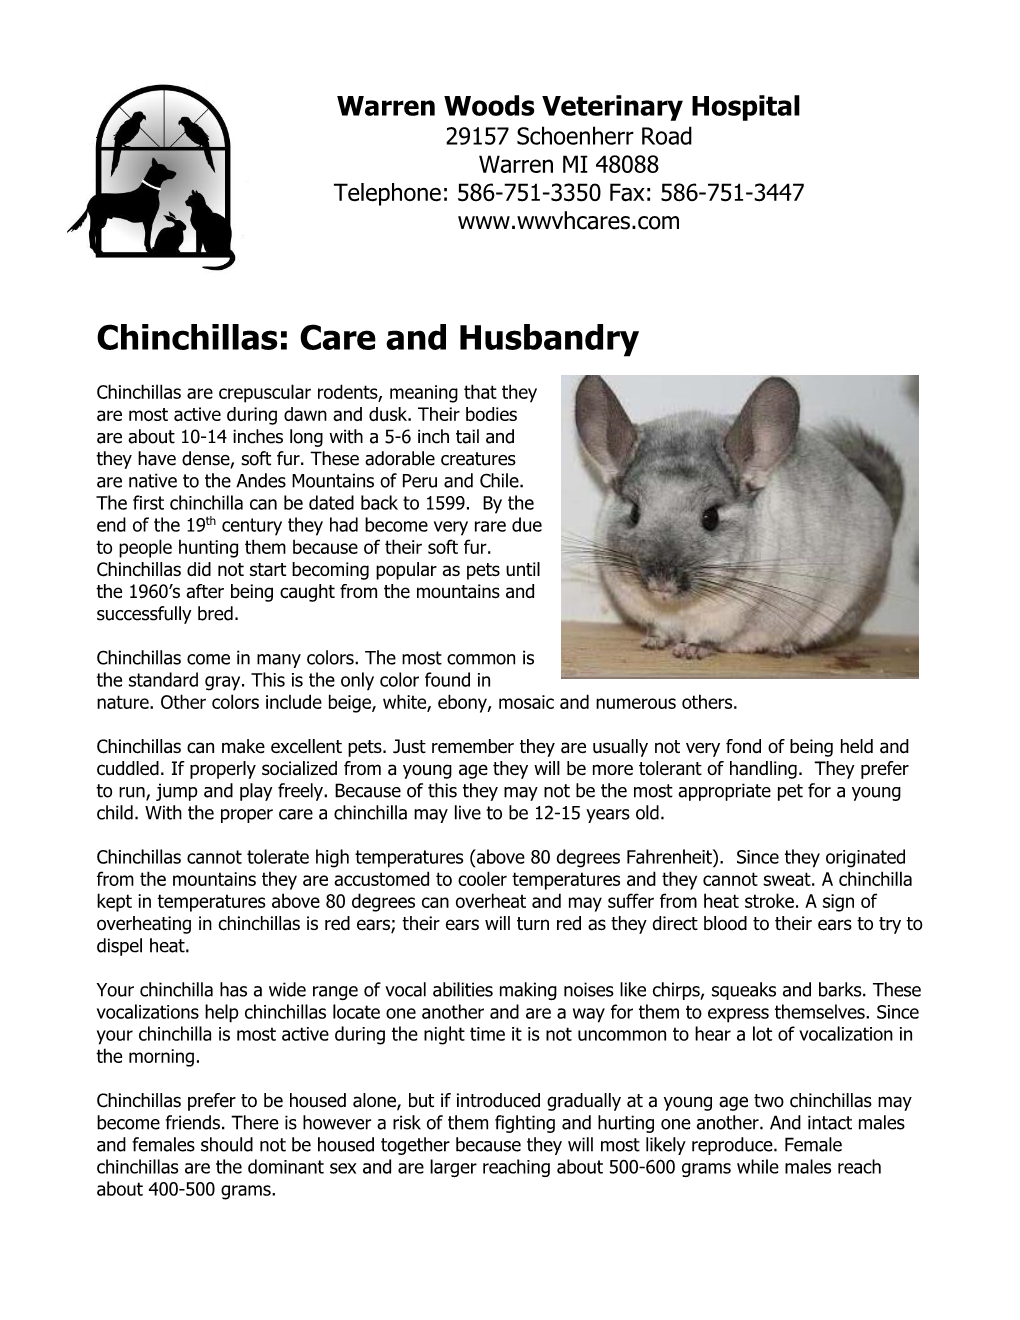 Chinchillas Are Crepuscular Rodents, Meaning That They Are Most Active During Dawn and Dusk